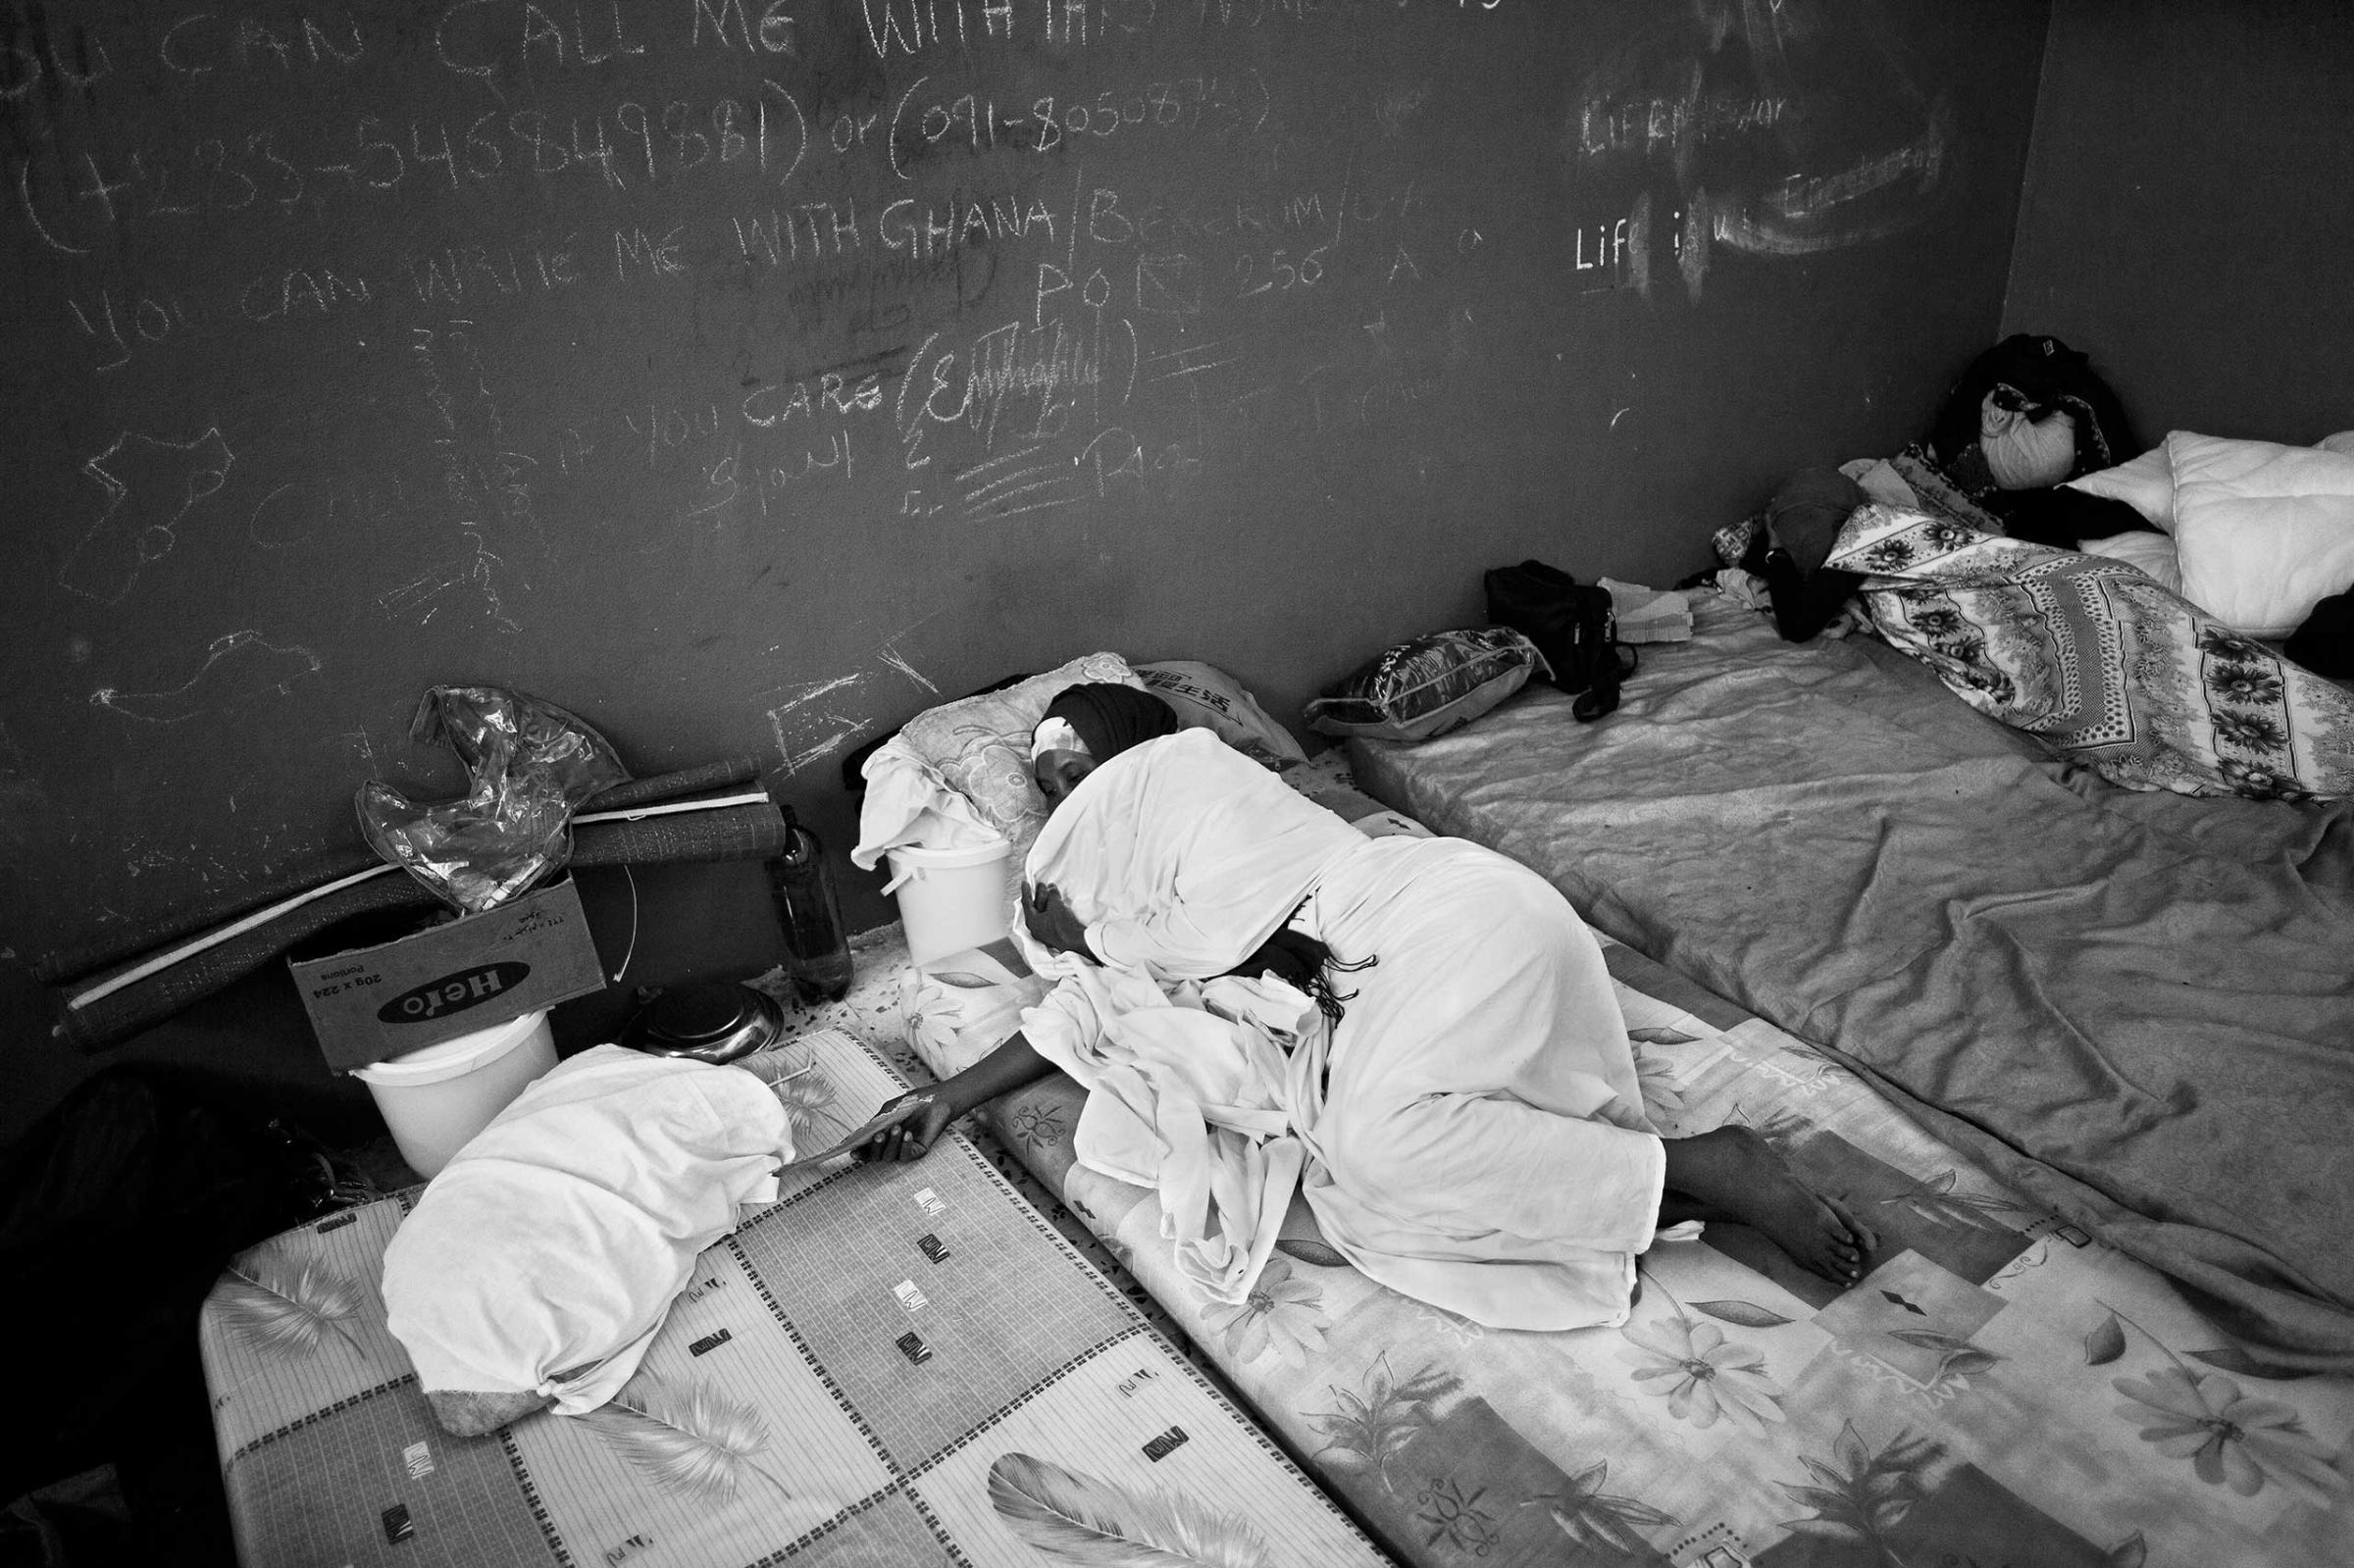 Migrants from Somalia is seen sleeping on a mattress on the floor barrack at a detention center for migrants near Maytigha Airport in Tripoli, Libya, Nov. 2013